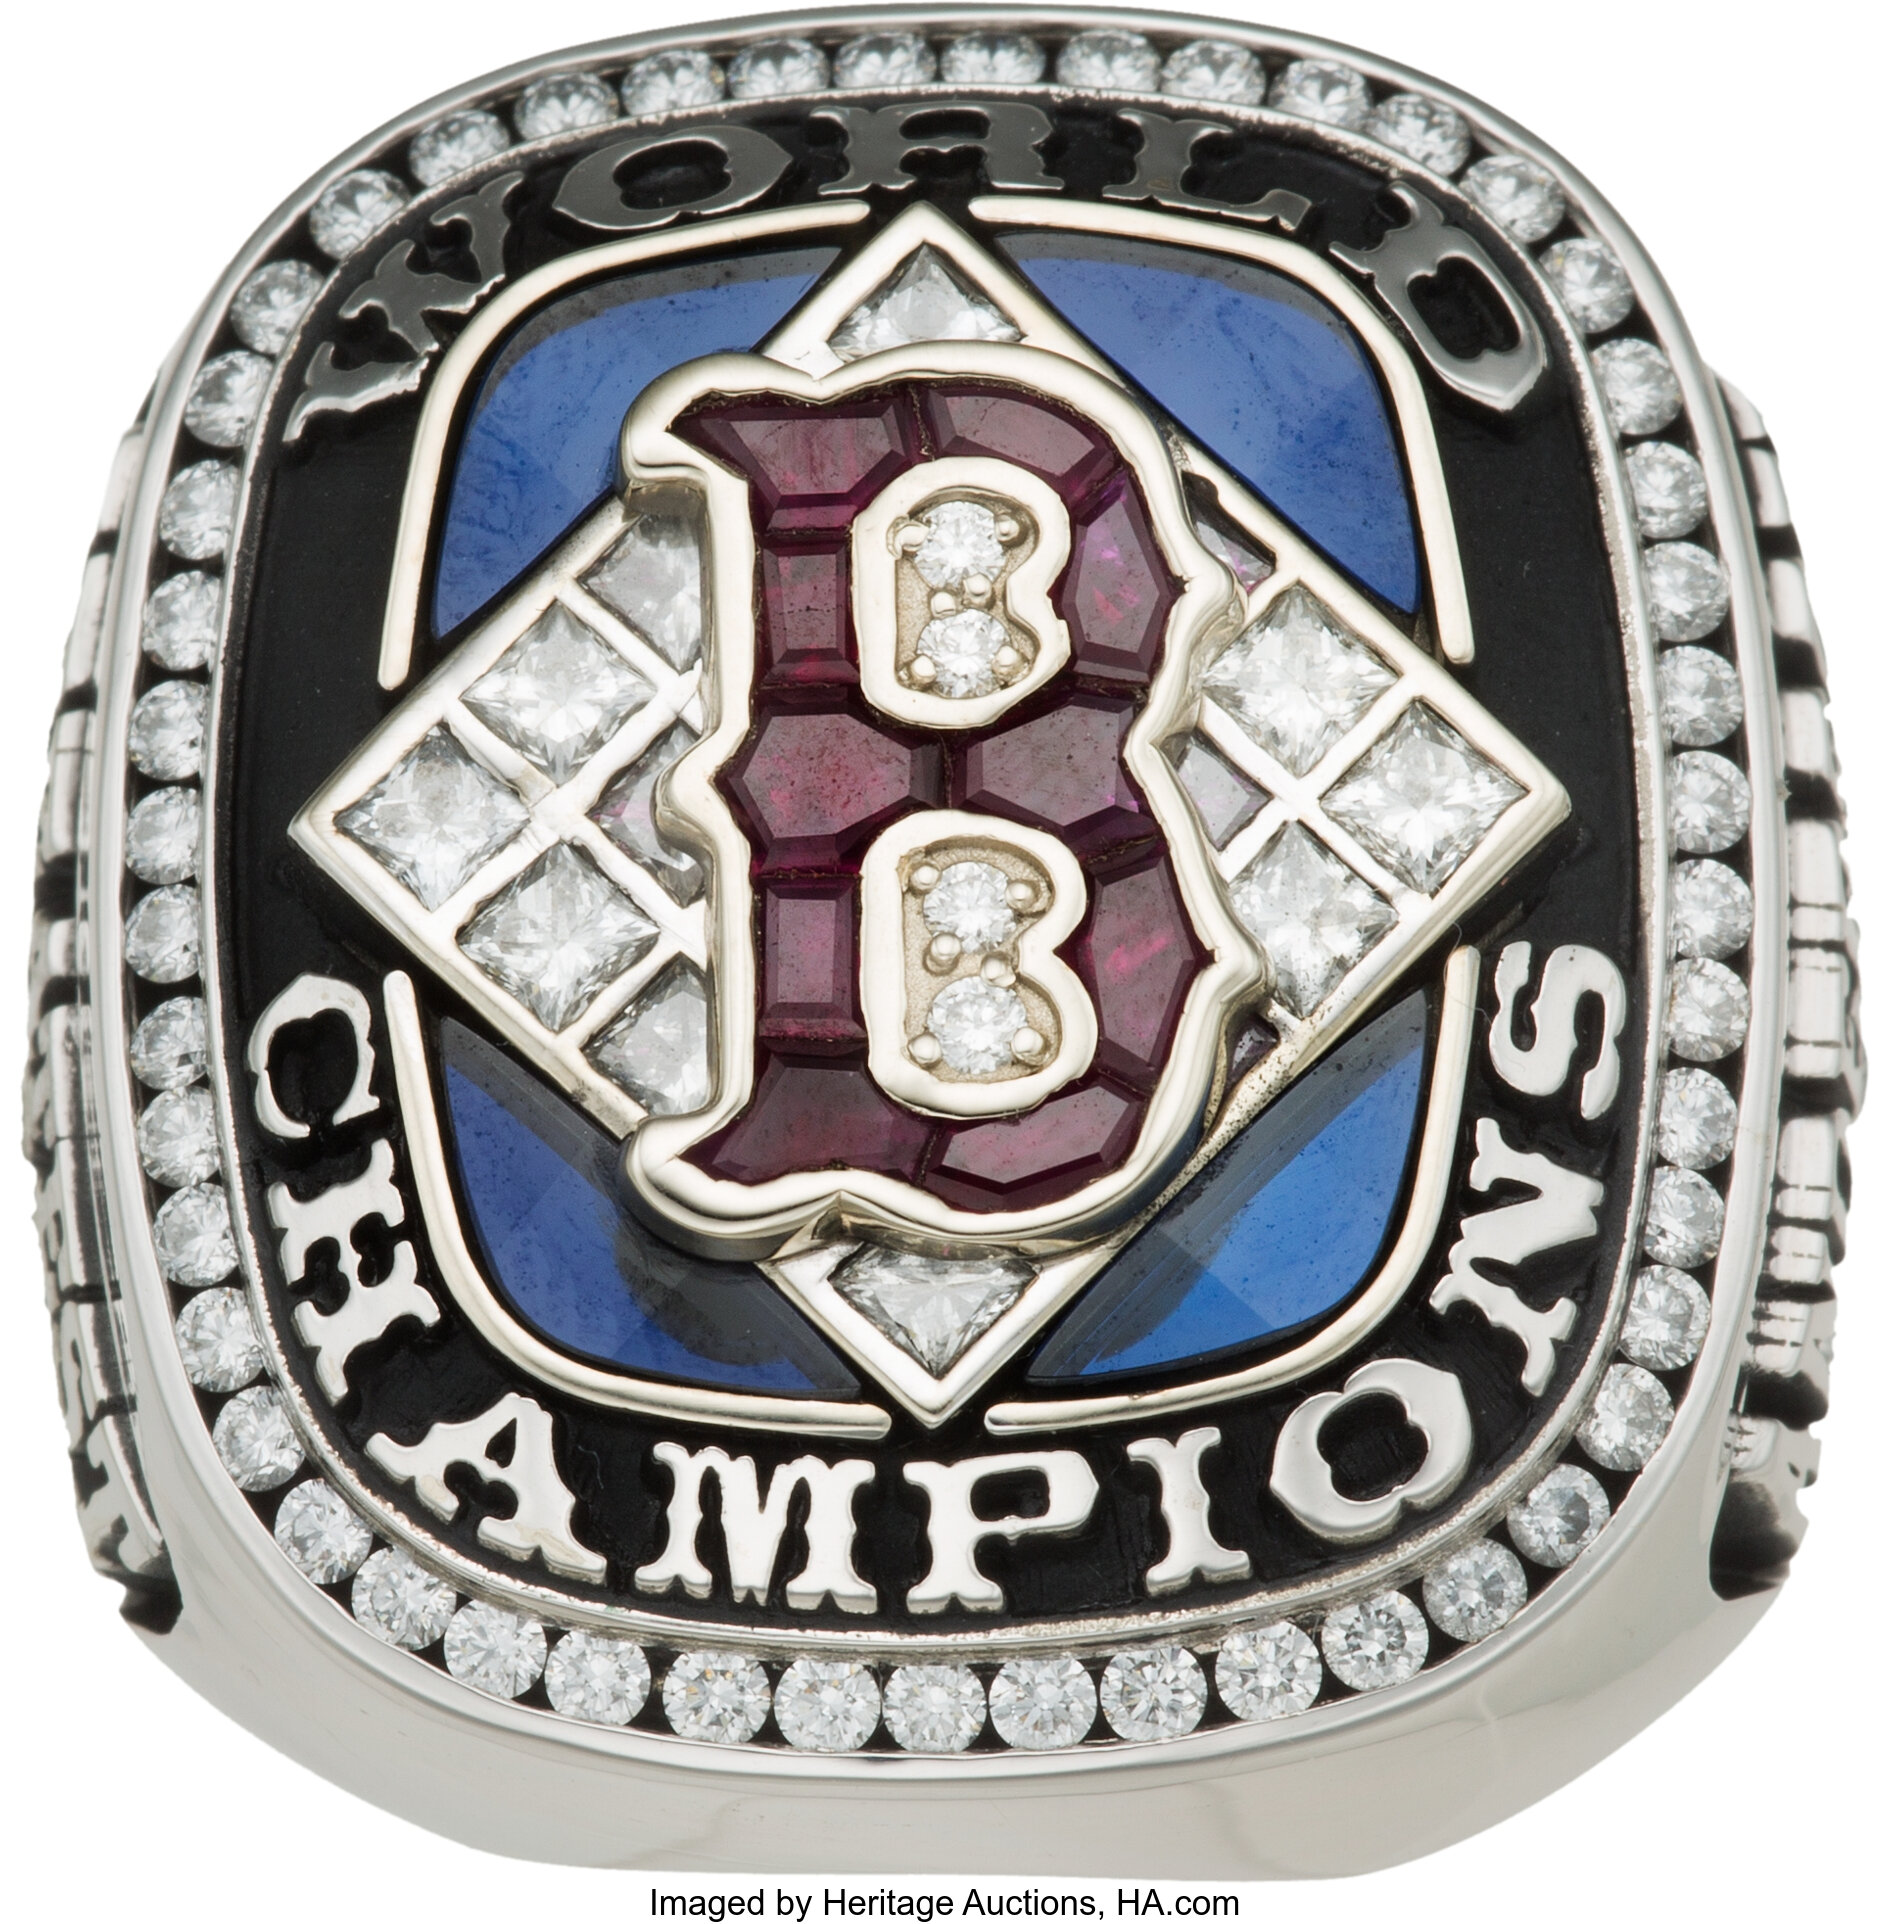 BOSTON RED SOX 2004 WORLD SERIES CHAMPIONS Officially Licensed Key Ring